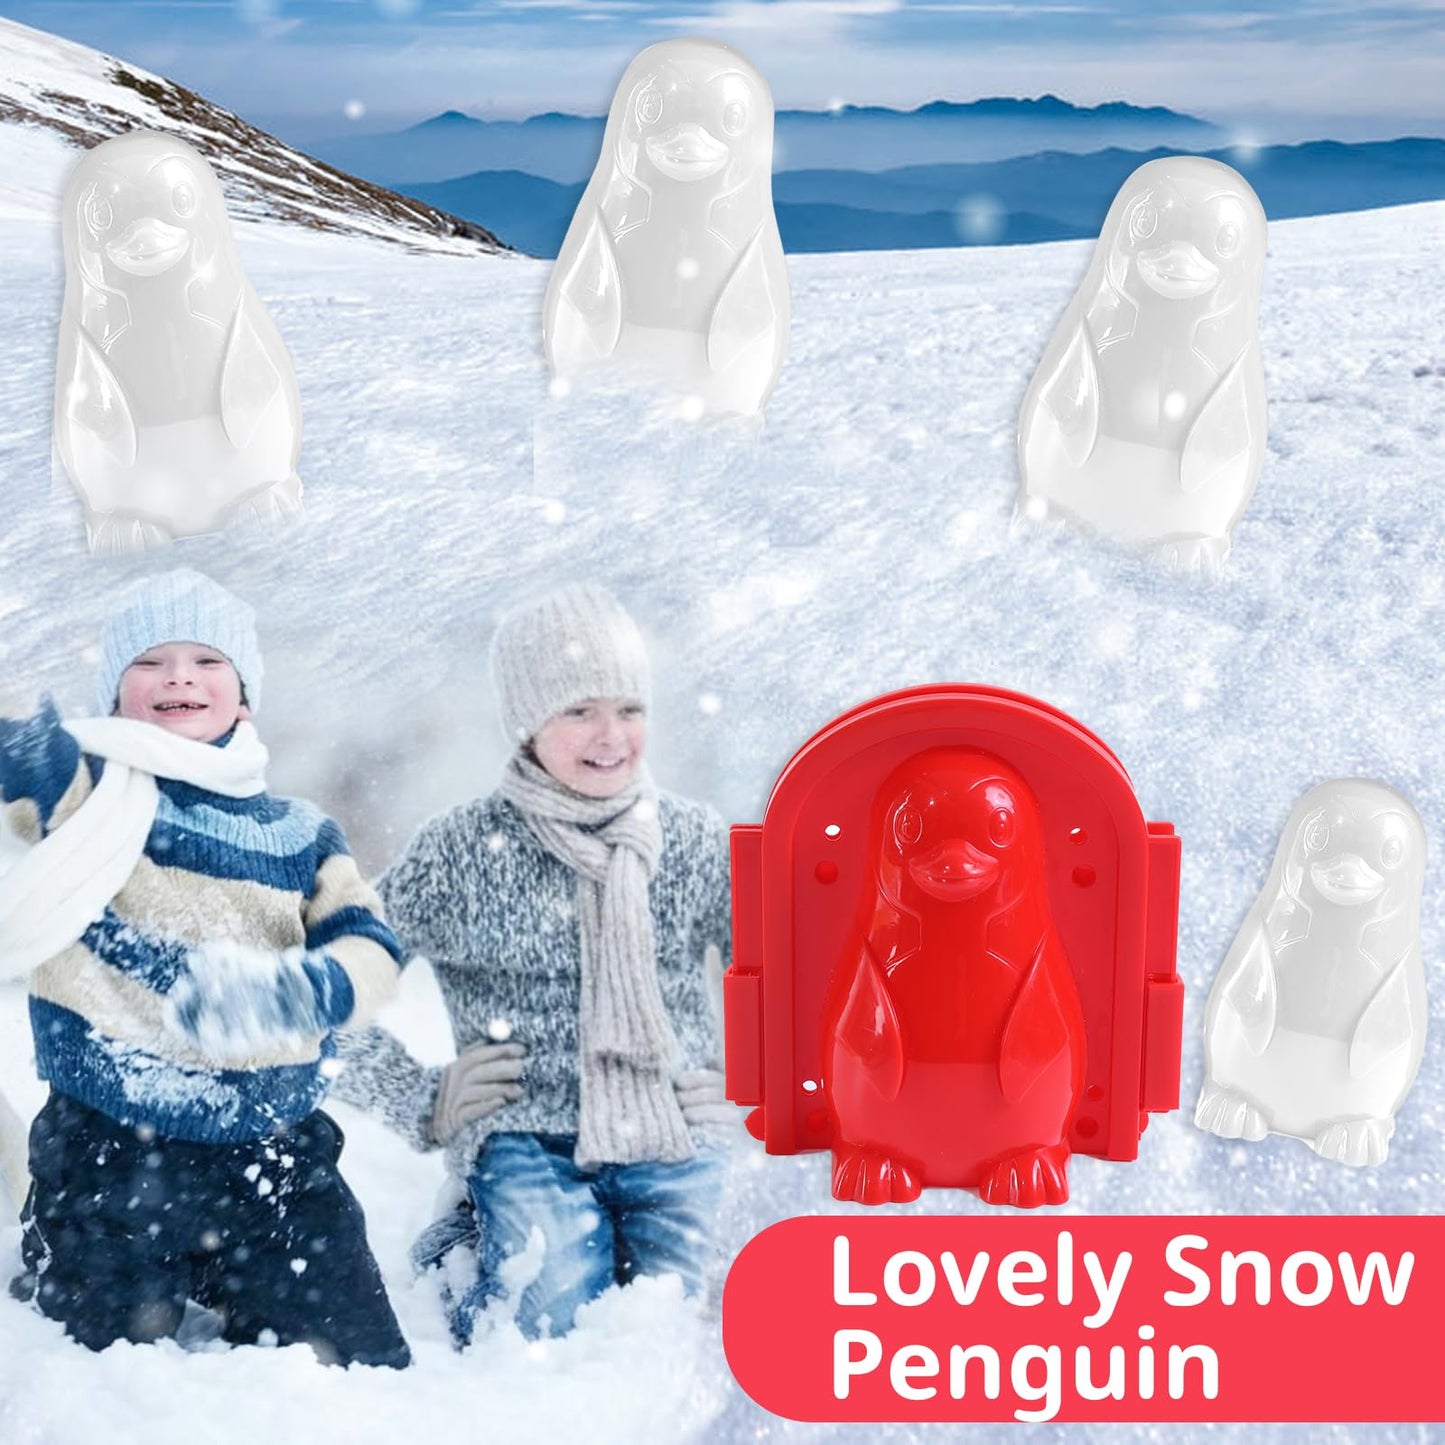 LBAIBB 16Pcs Snow Ball Makers Toys with Handle for Boys Girls of Duck Penguin Snowman for Kids Adults Outdoor Winter Snow Toys Kit with Storage Bag Maker Tool Winter Snow Toys Kit